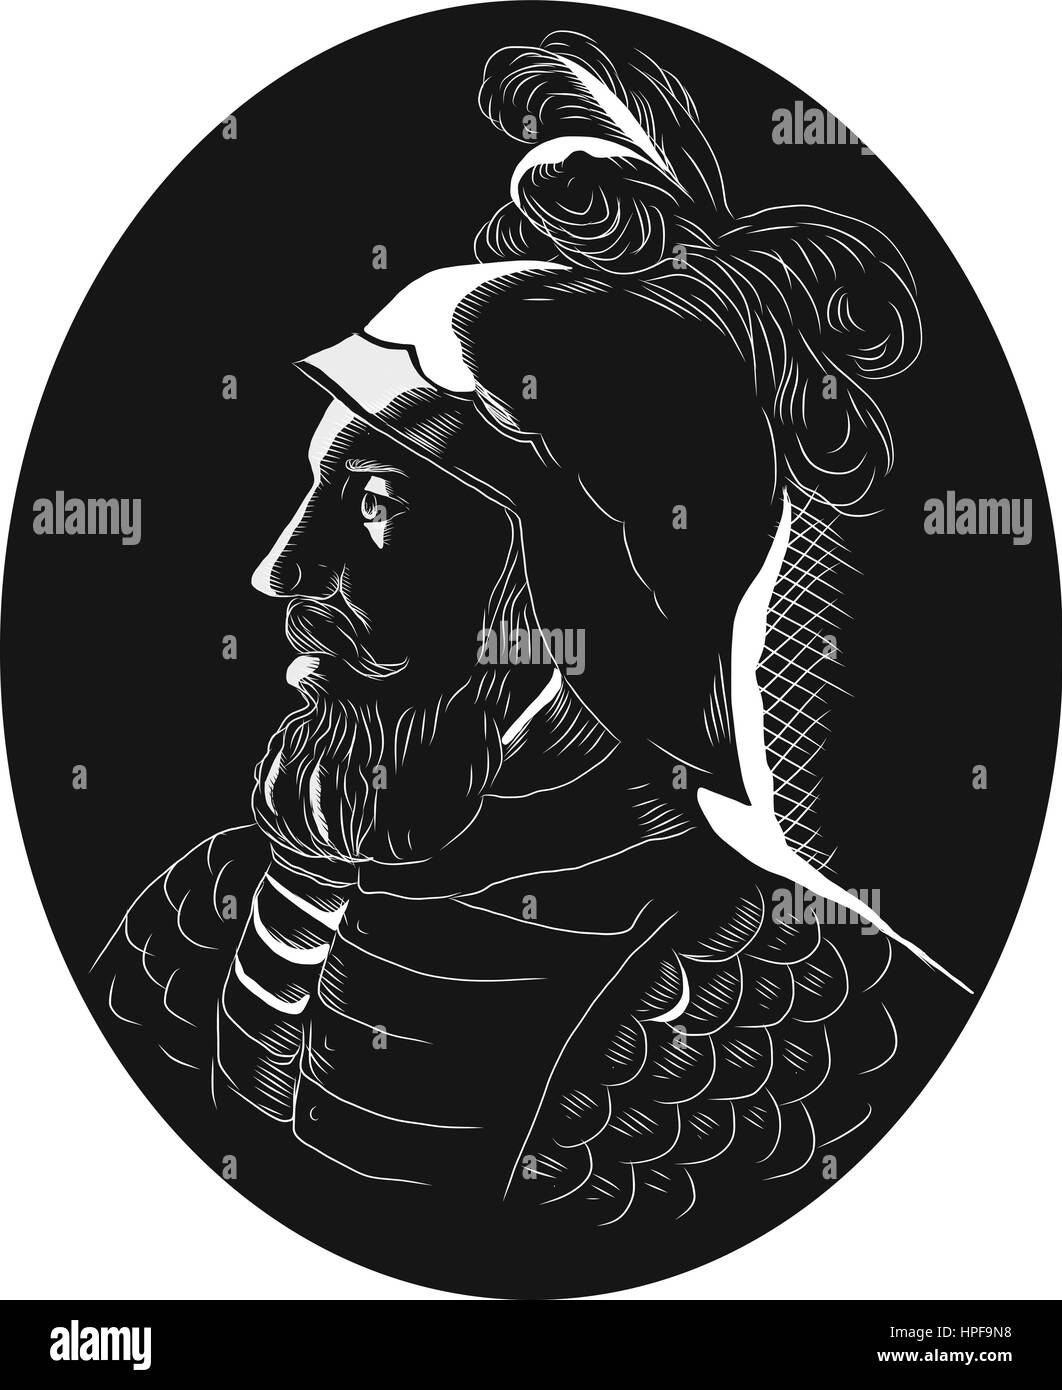 Illustration of Vasco Nunez de Balboa, Spanish explorer, governor, and conquistador who crossed the Isthmus of Panama to the Pacific Ocean in 1513 and Stock Vector